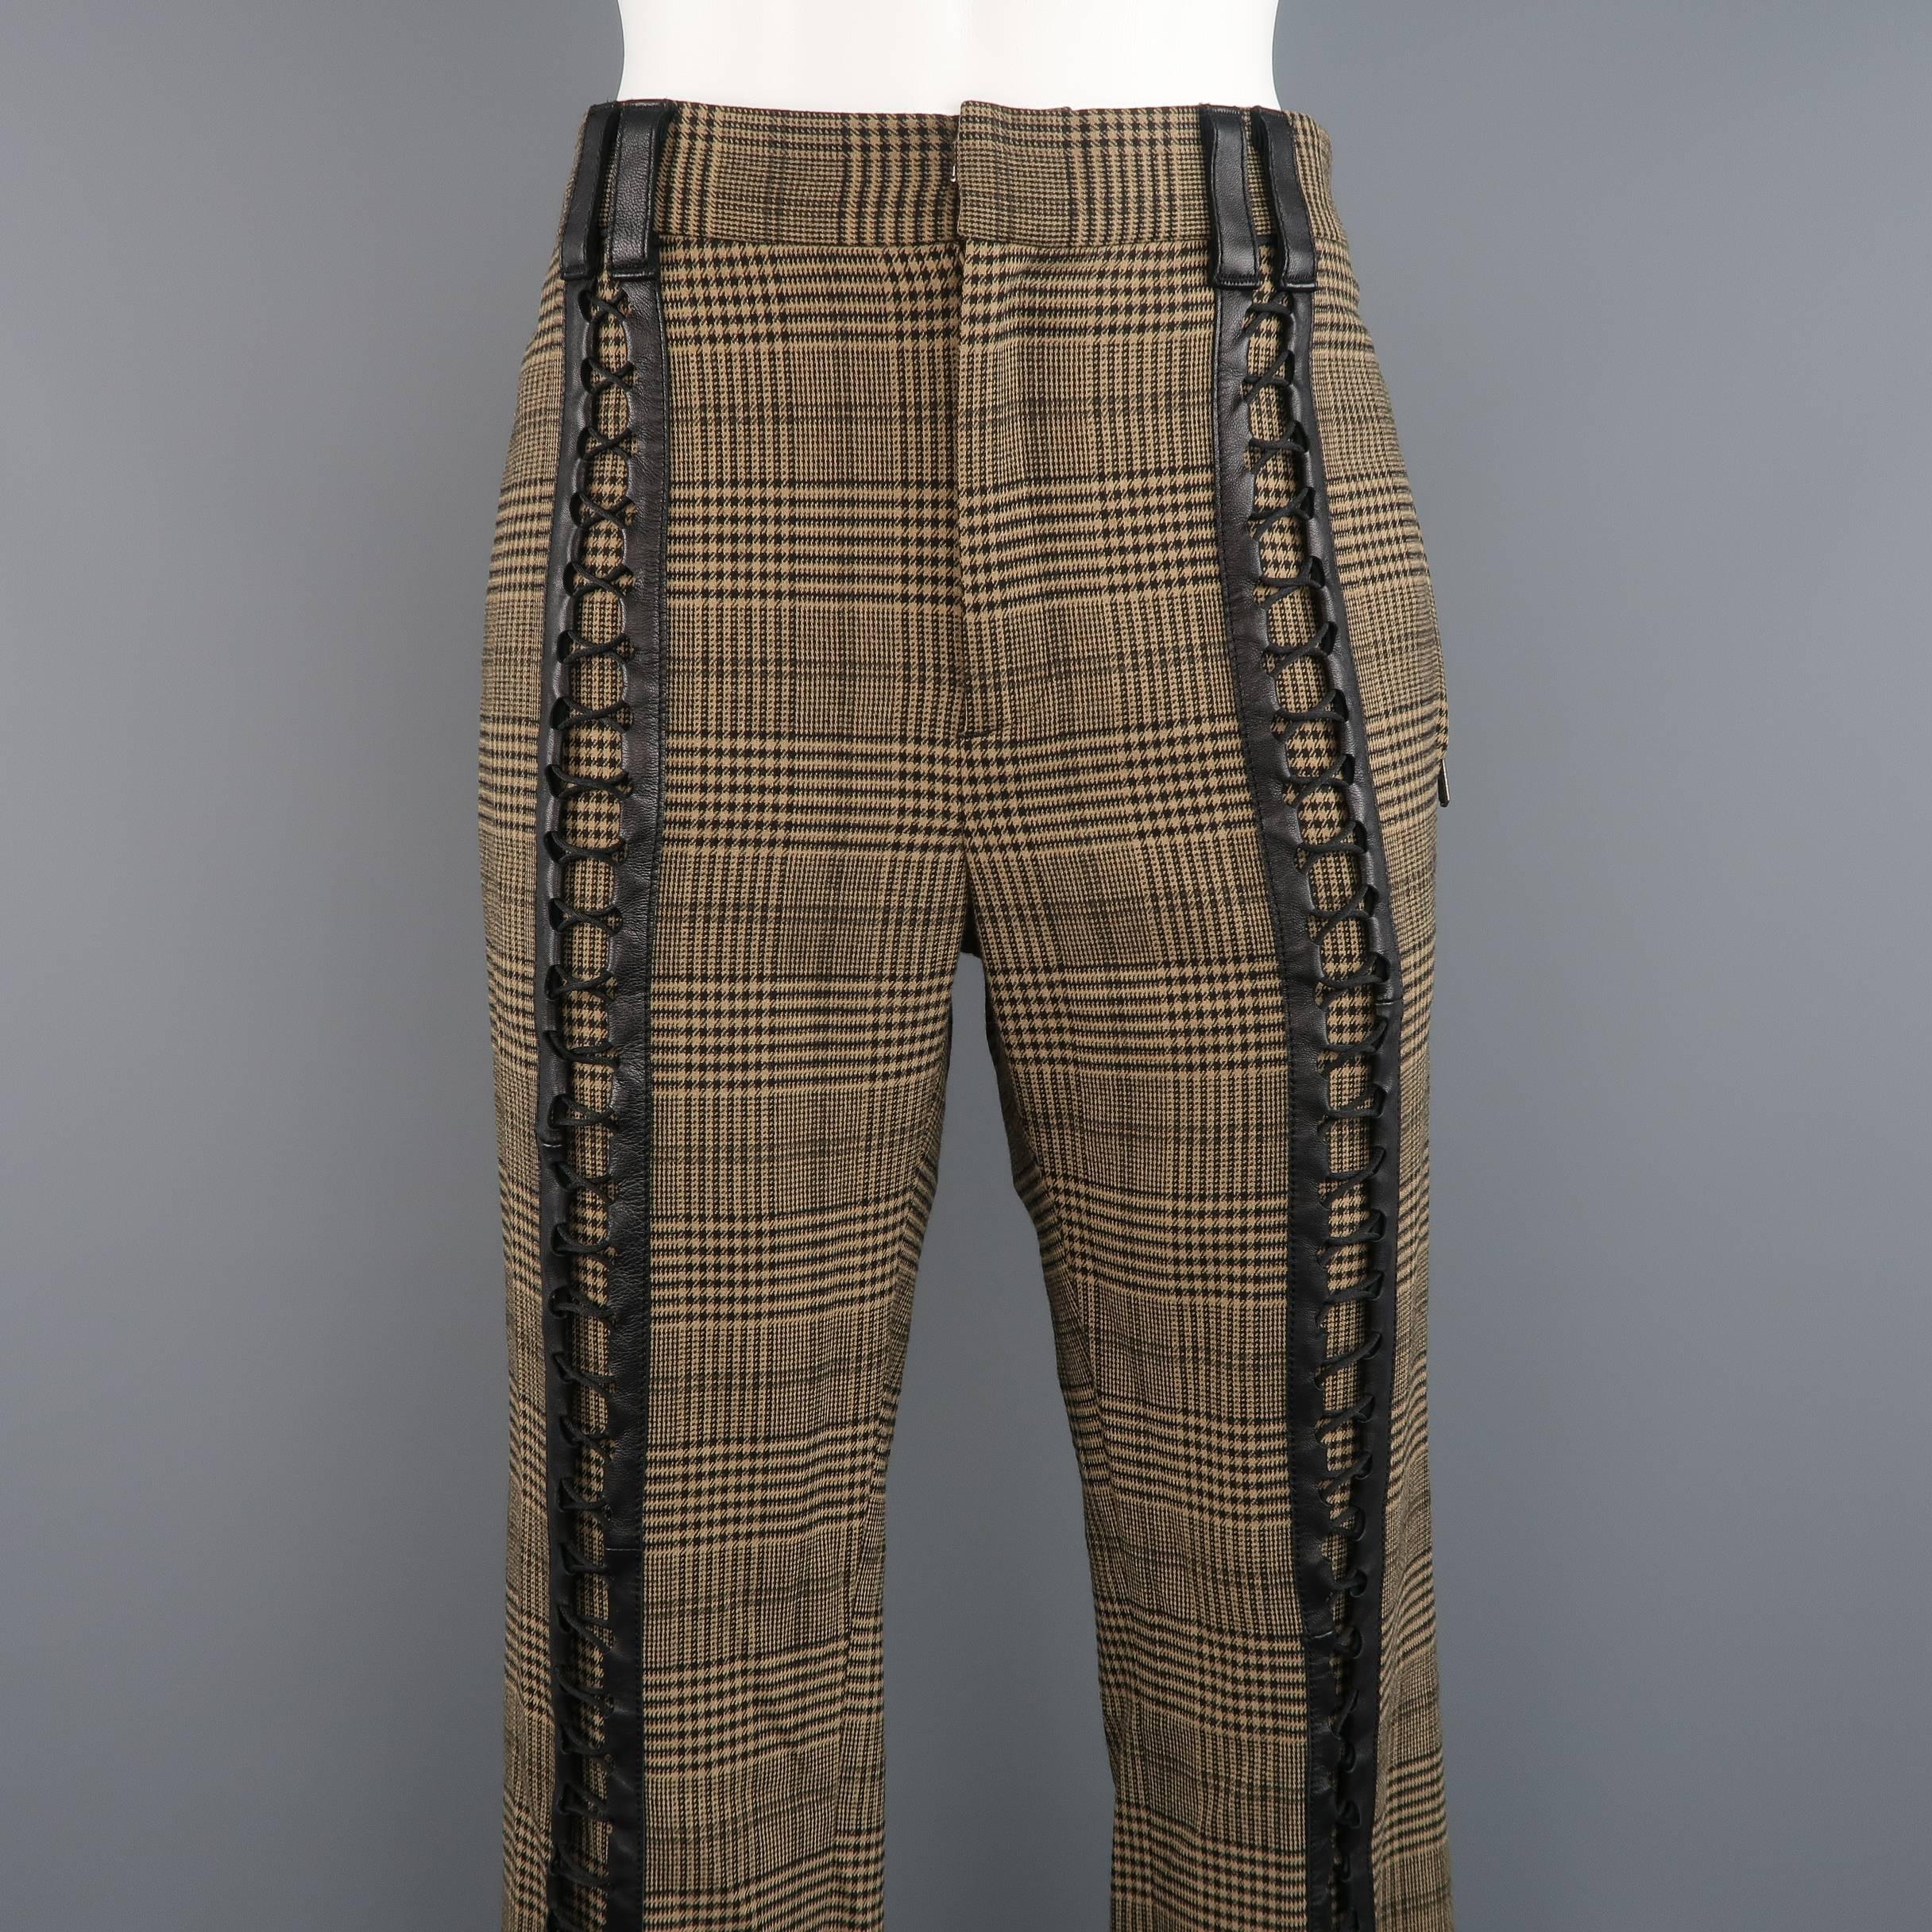 These rare vintage GAULTIER2 by JEAN PAUL GAULTIER dress pants come in a tan and black glenplaid print wool blend material and feature a tapered leg and black leather detailed lace up front. Made in Italy.
 
Excellent Pre-Owned Condition.
Marked: